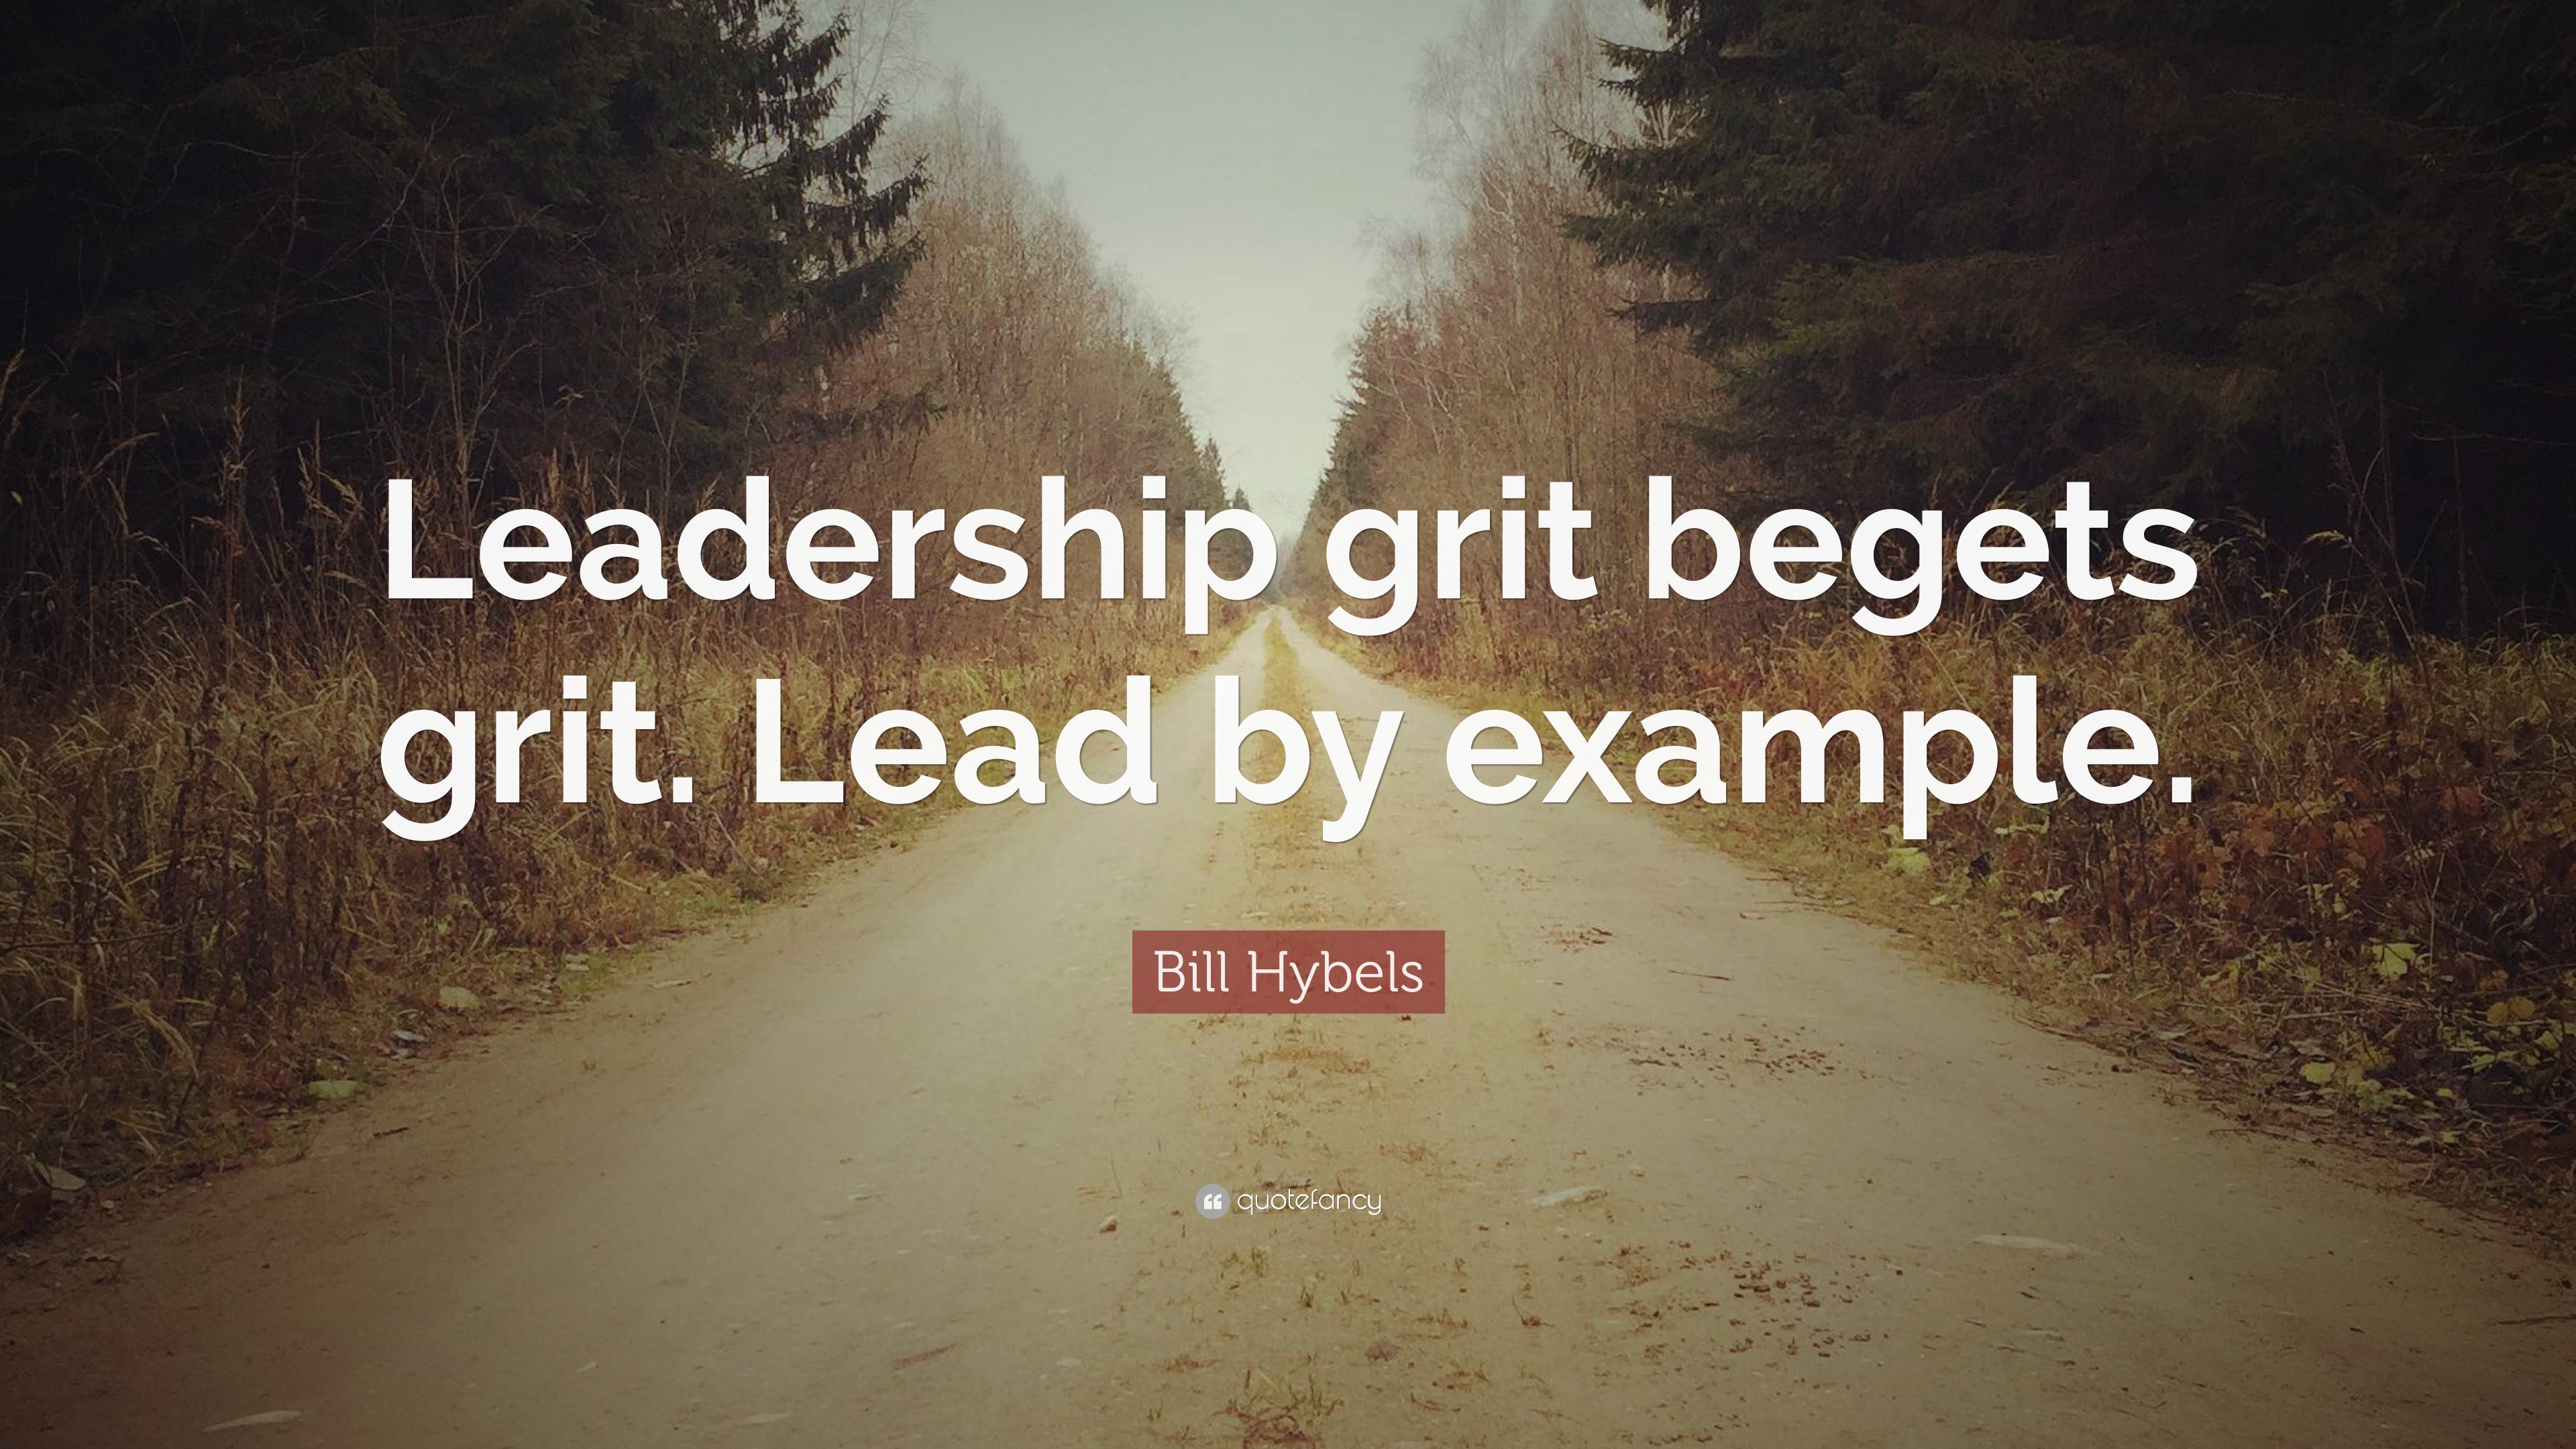 grit quotes